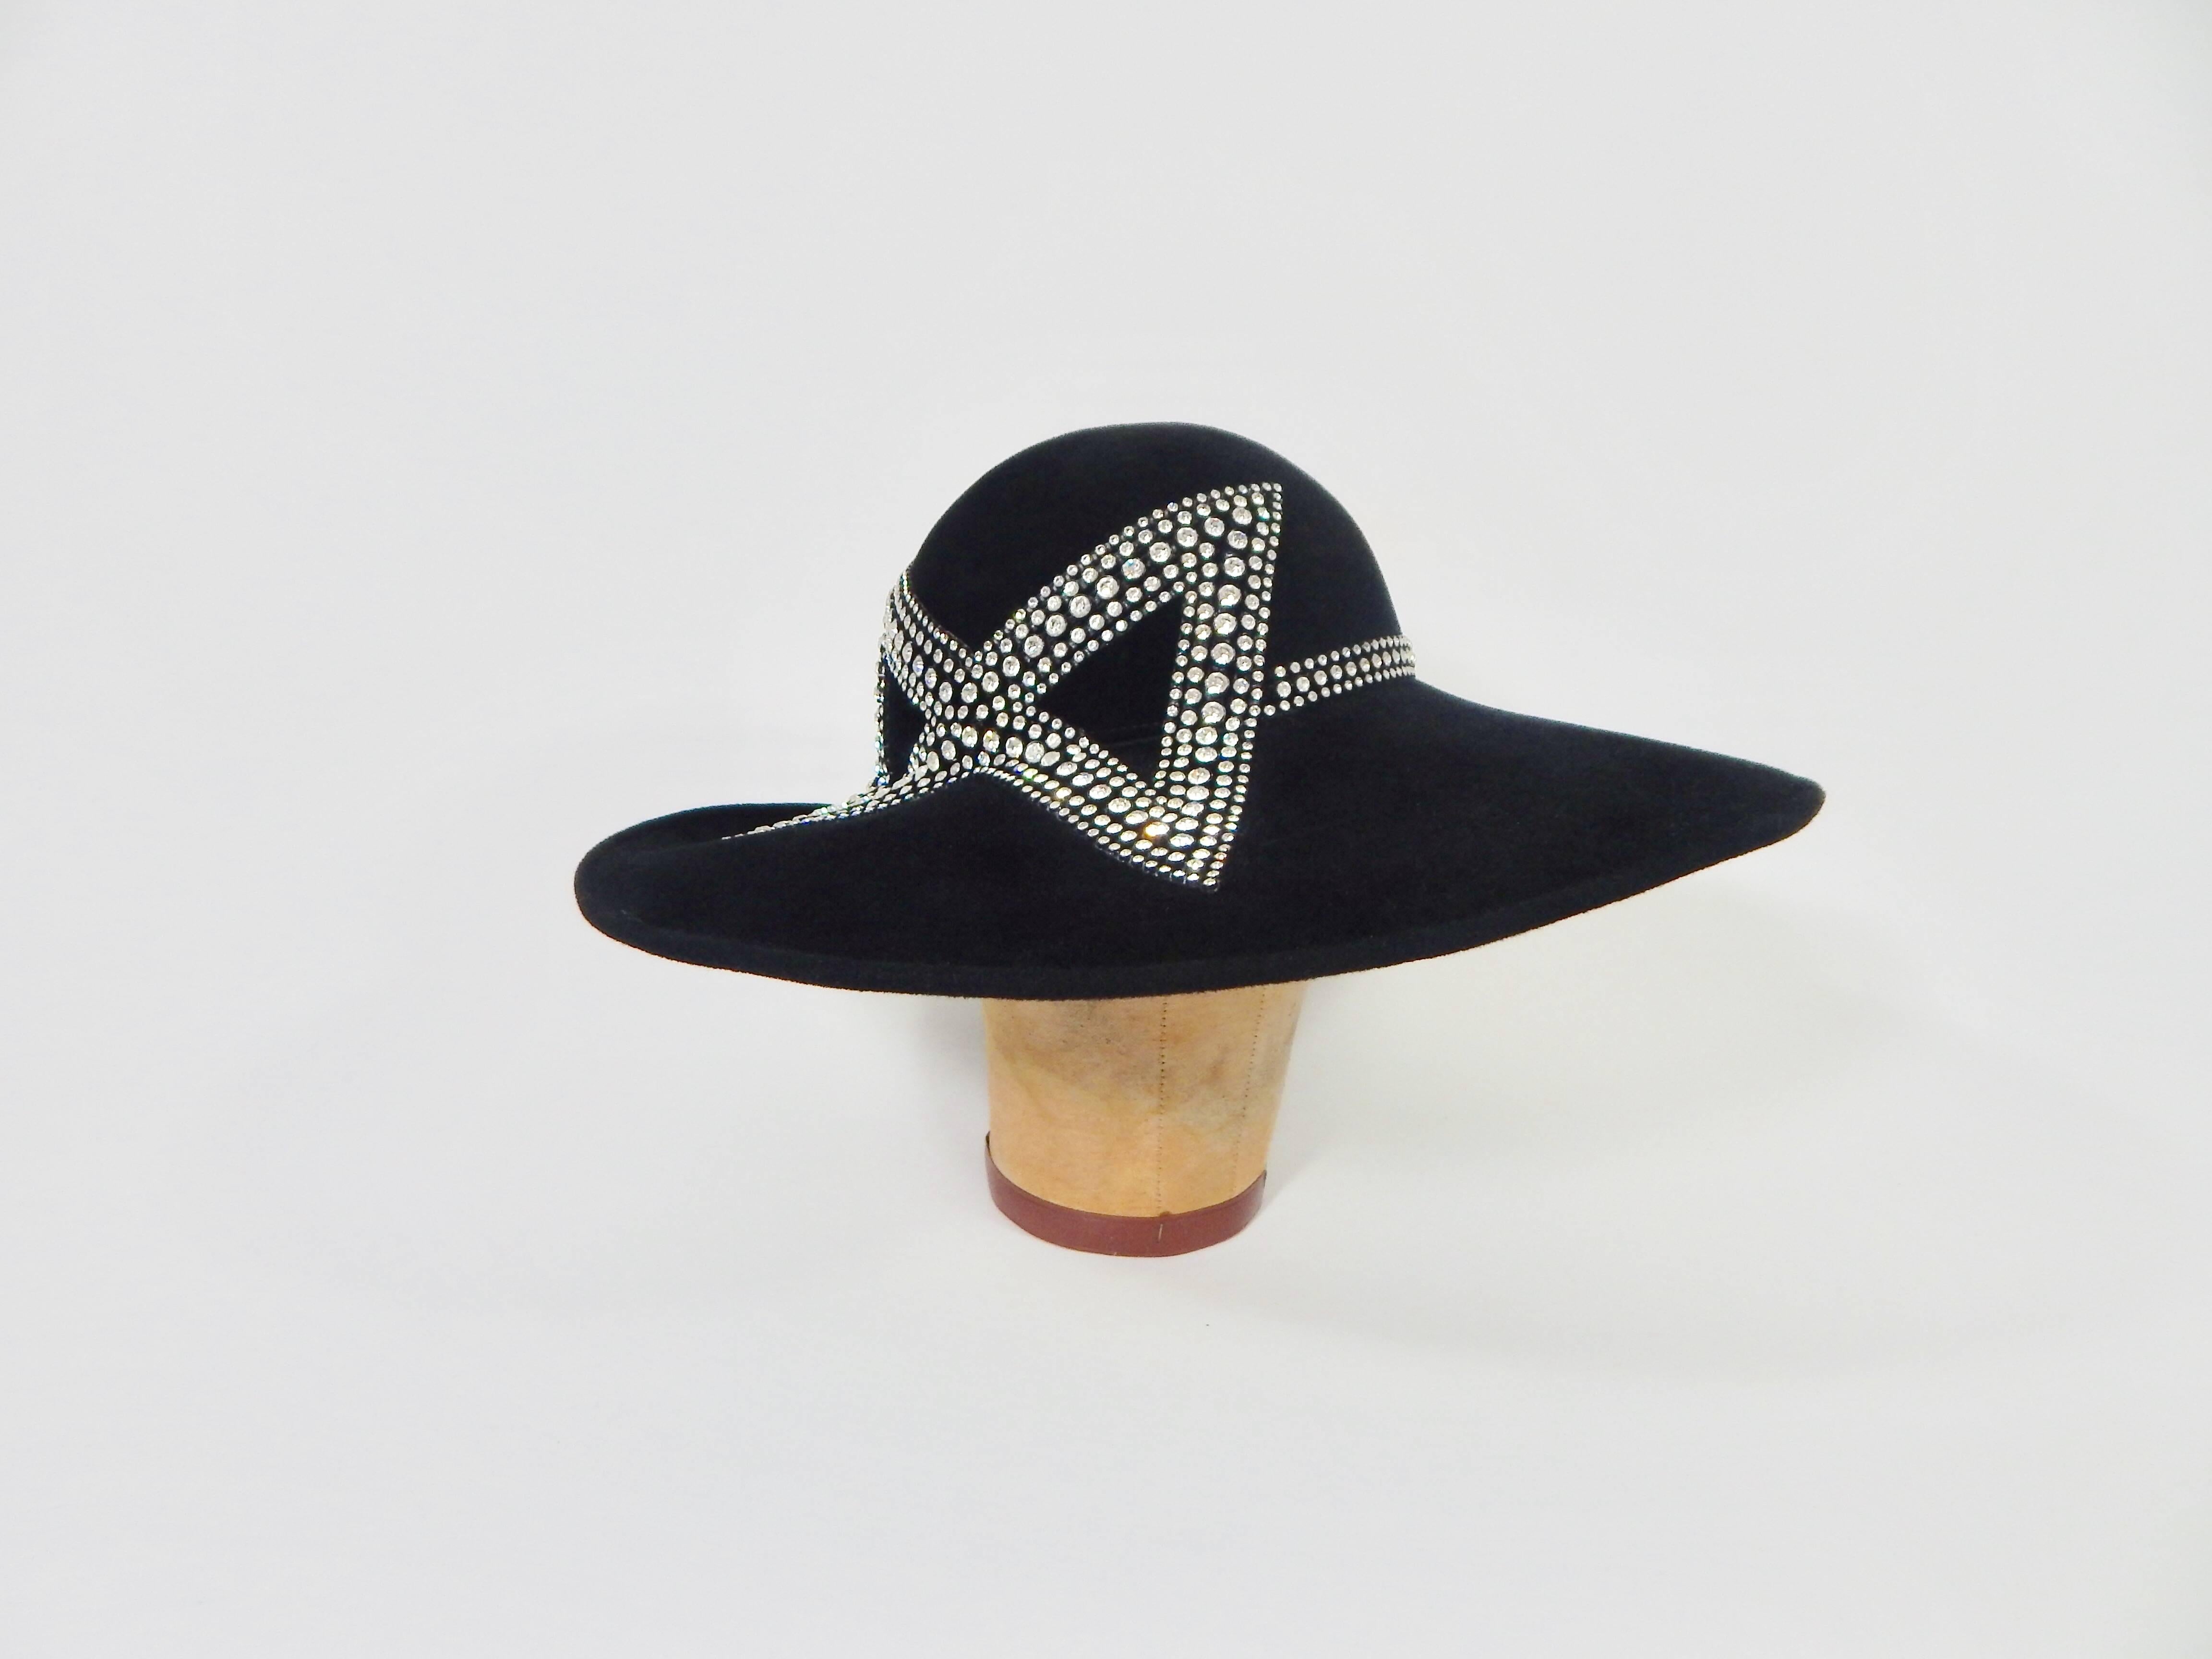 Fabulous 1950s Jack McConnell New York Hat. Black Felt with Rhinestones. 
Size 22 inches or medium. Excellent Condition. 